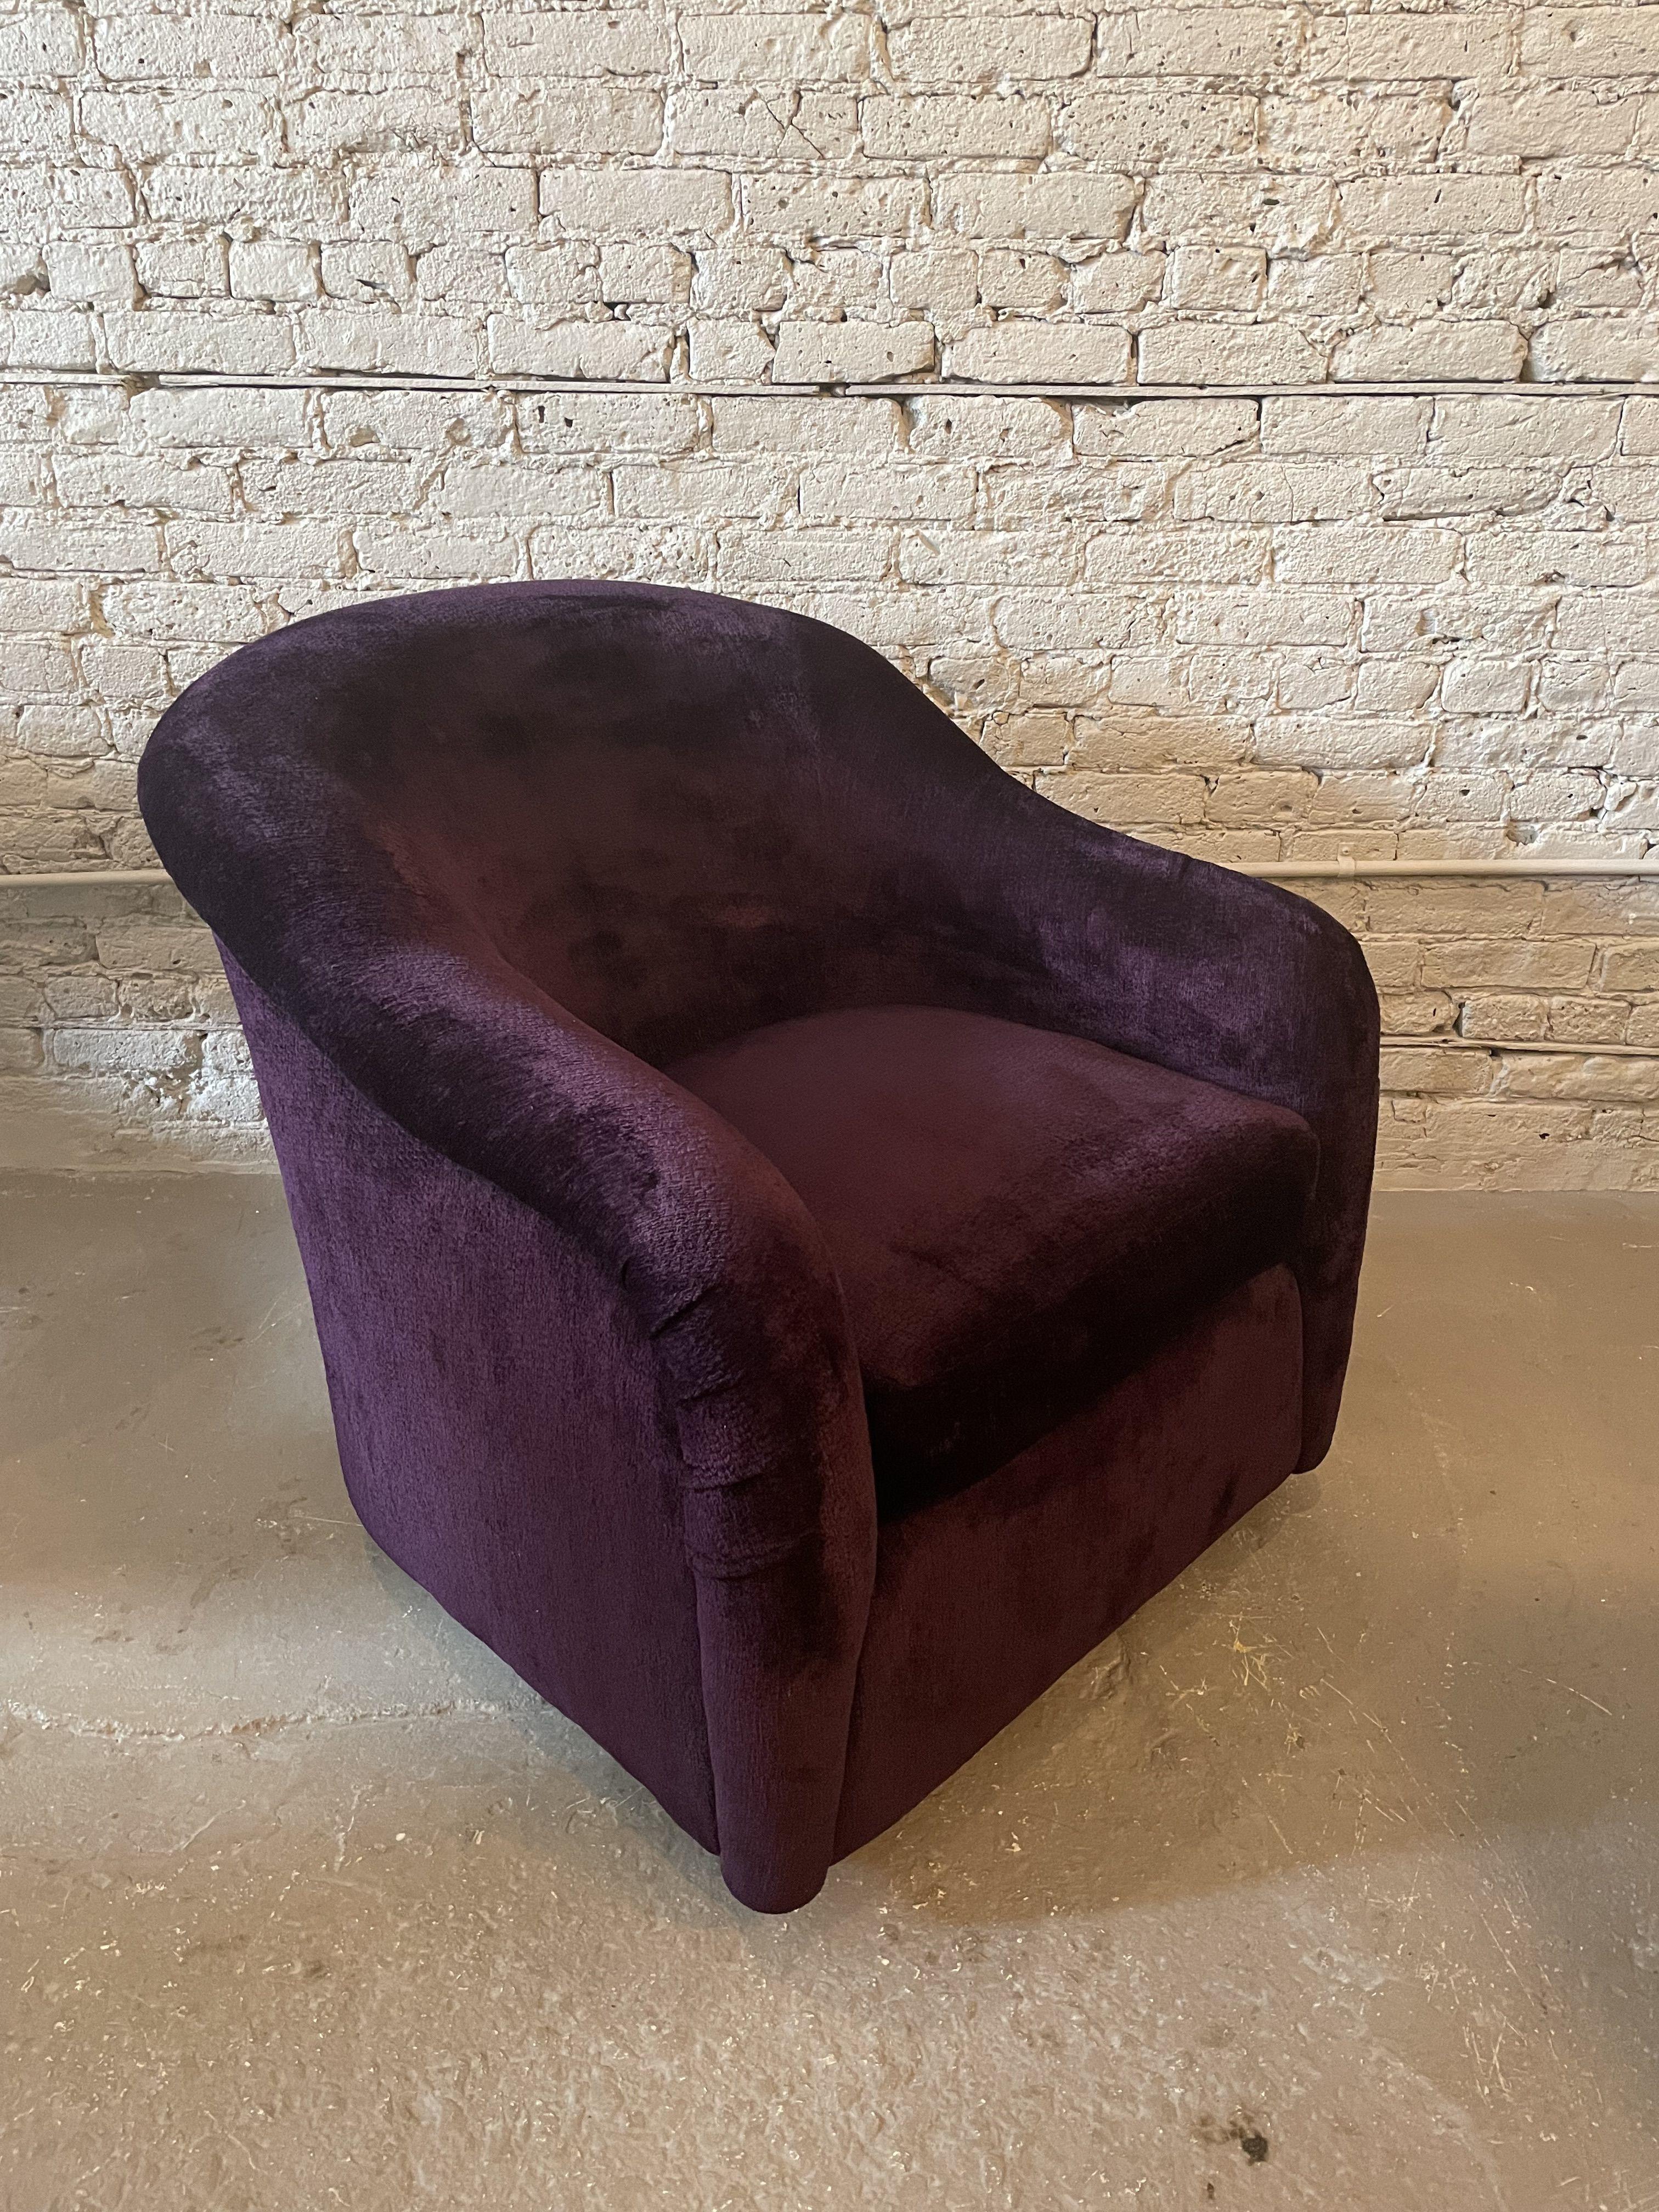 Unbelievable chairs. These are absolutely wonderful chairs. The seat is deep and a bit narrow but the cushions and quality are on point. The beautiful curved arms give just the right amount of flare to these. A. Rudin is still producing these today